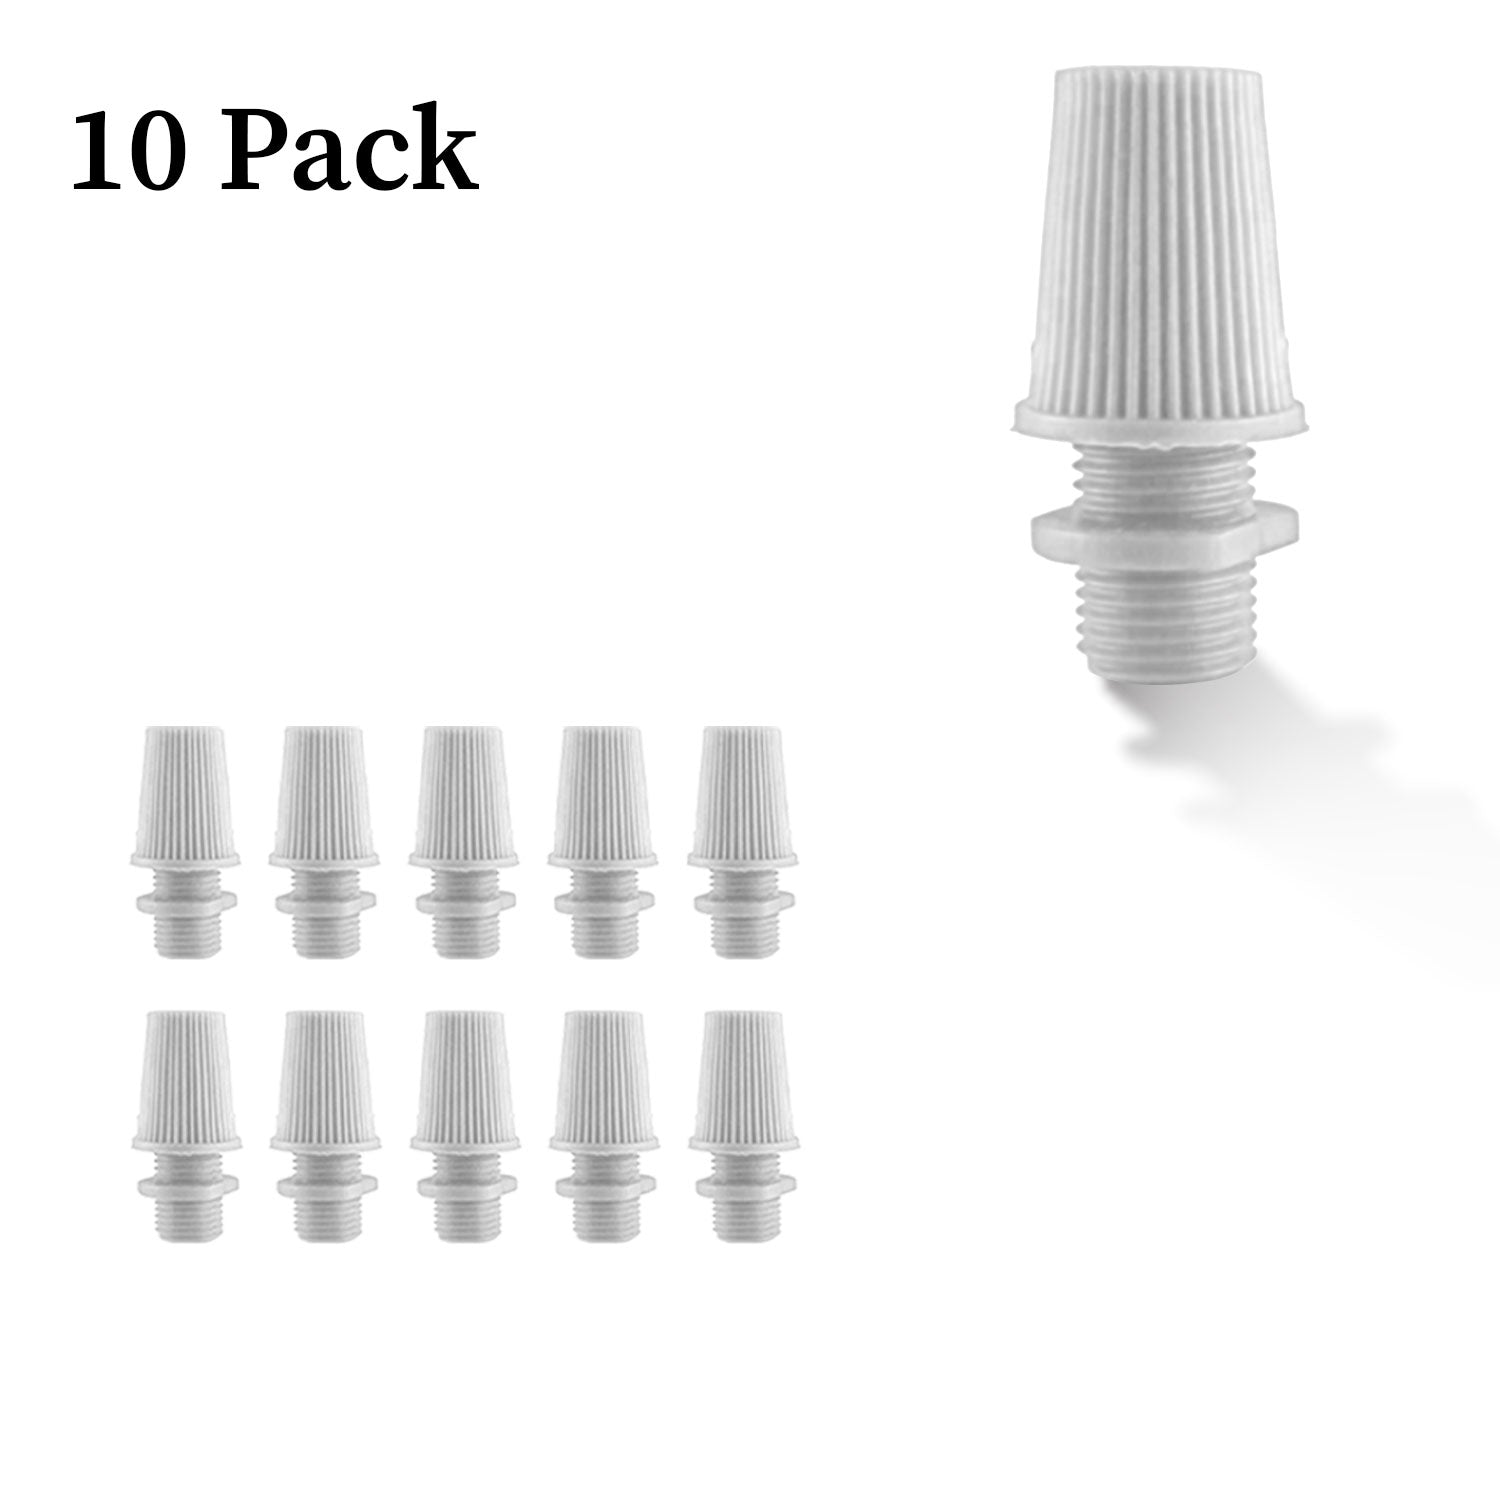 White 10mm Male Thread Cable Cord Grip Lock